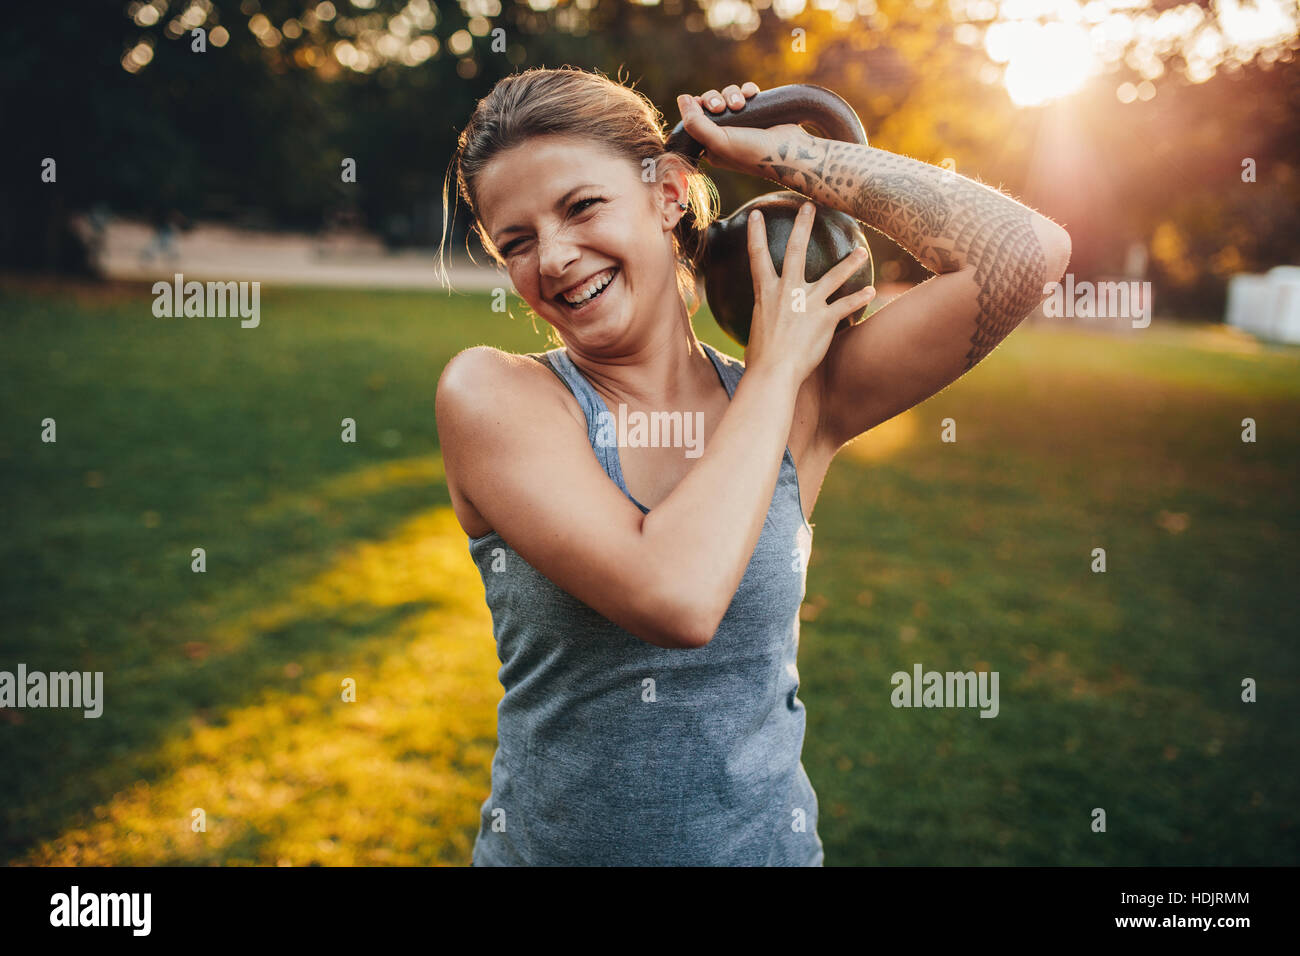 Portrait of happy young woman with kettlebell weights on her shoulder in the park. Stock Photo